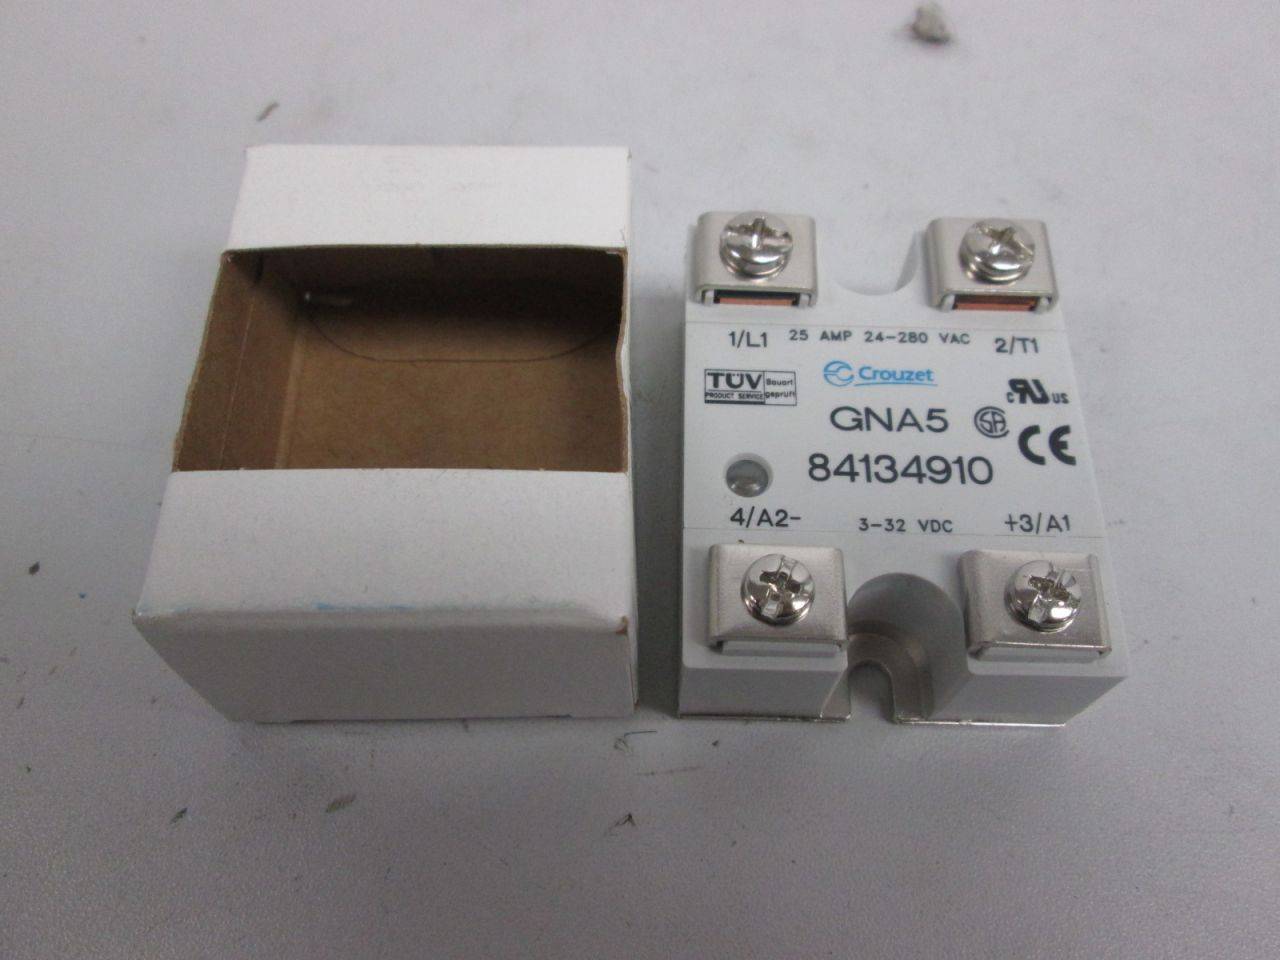 Details about  / New Crouzet 84137111 Solid State Relay 25 Amp 90-280 VAC 